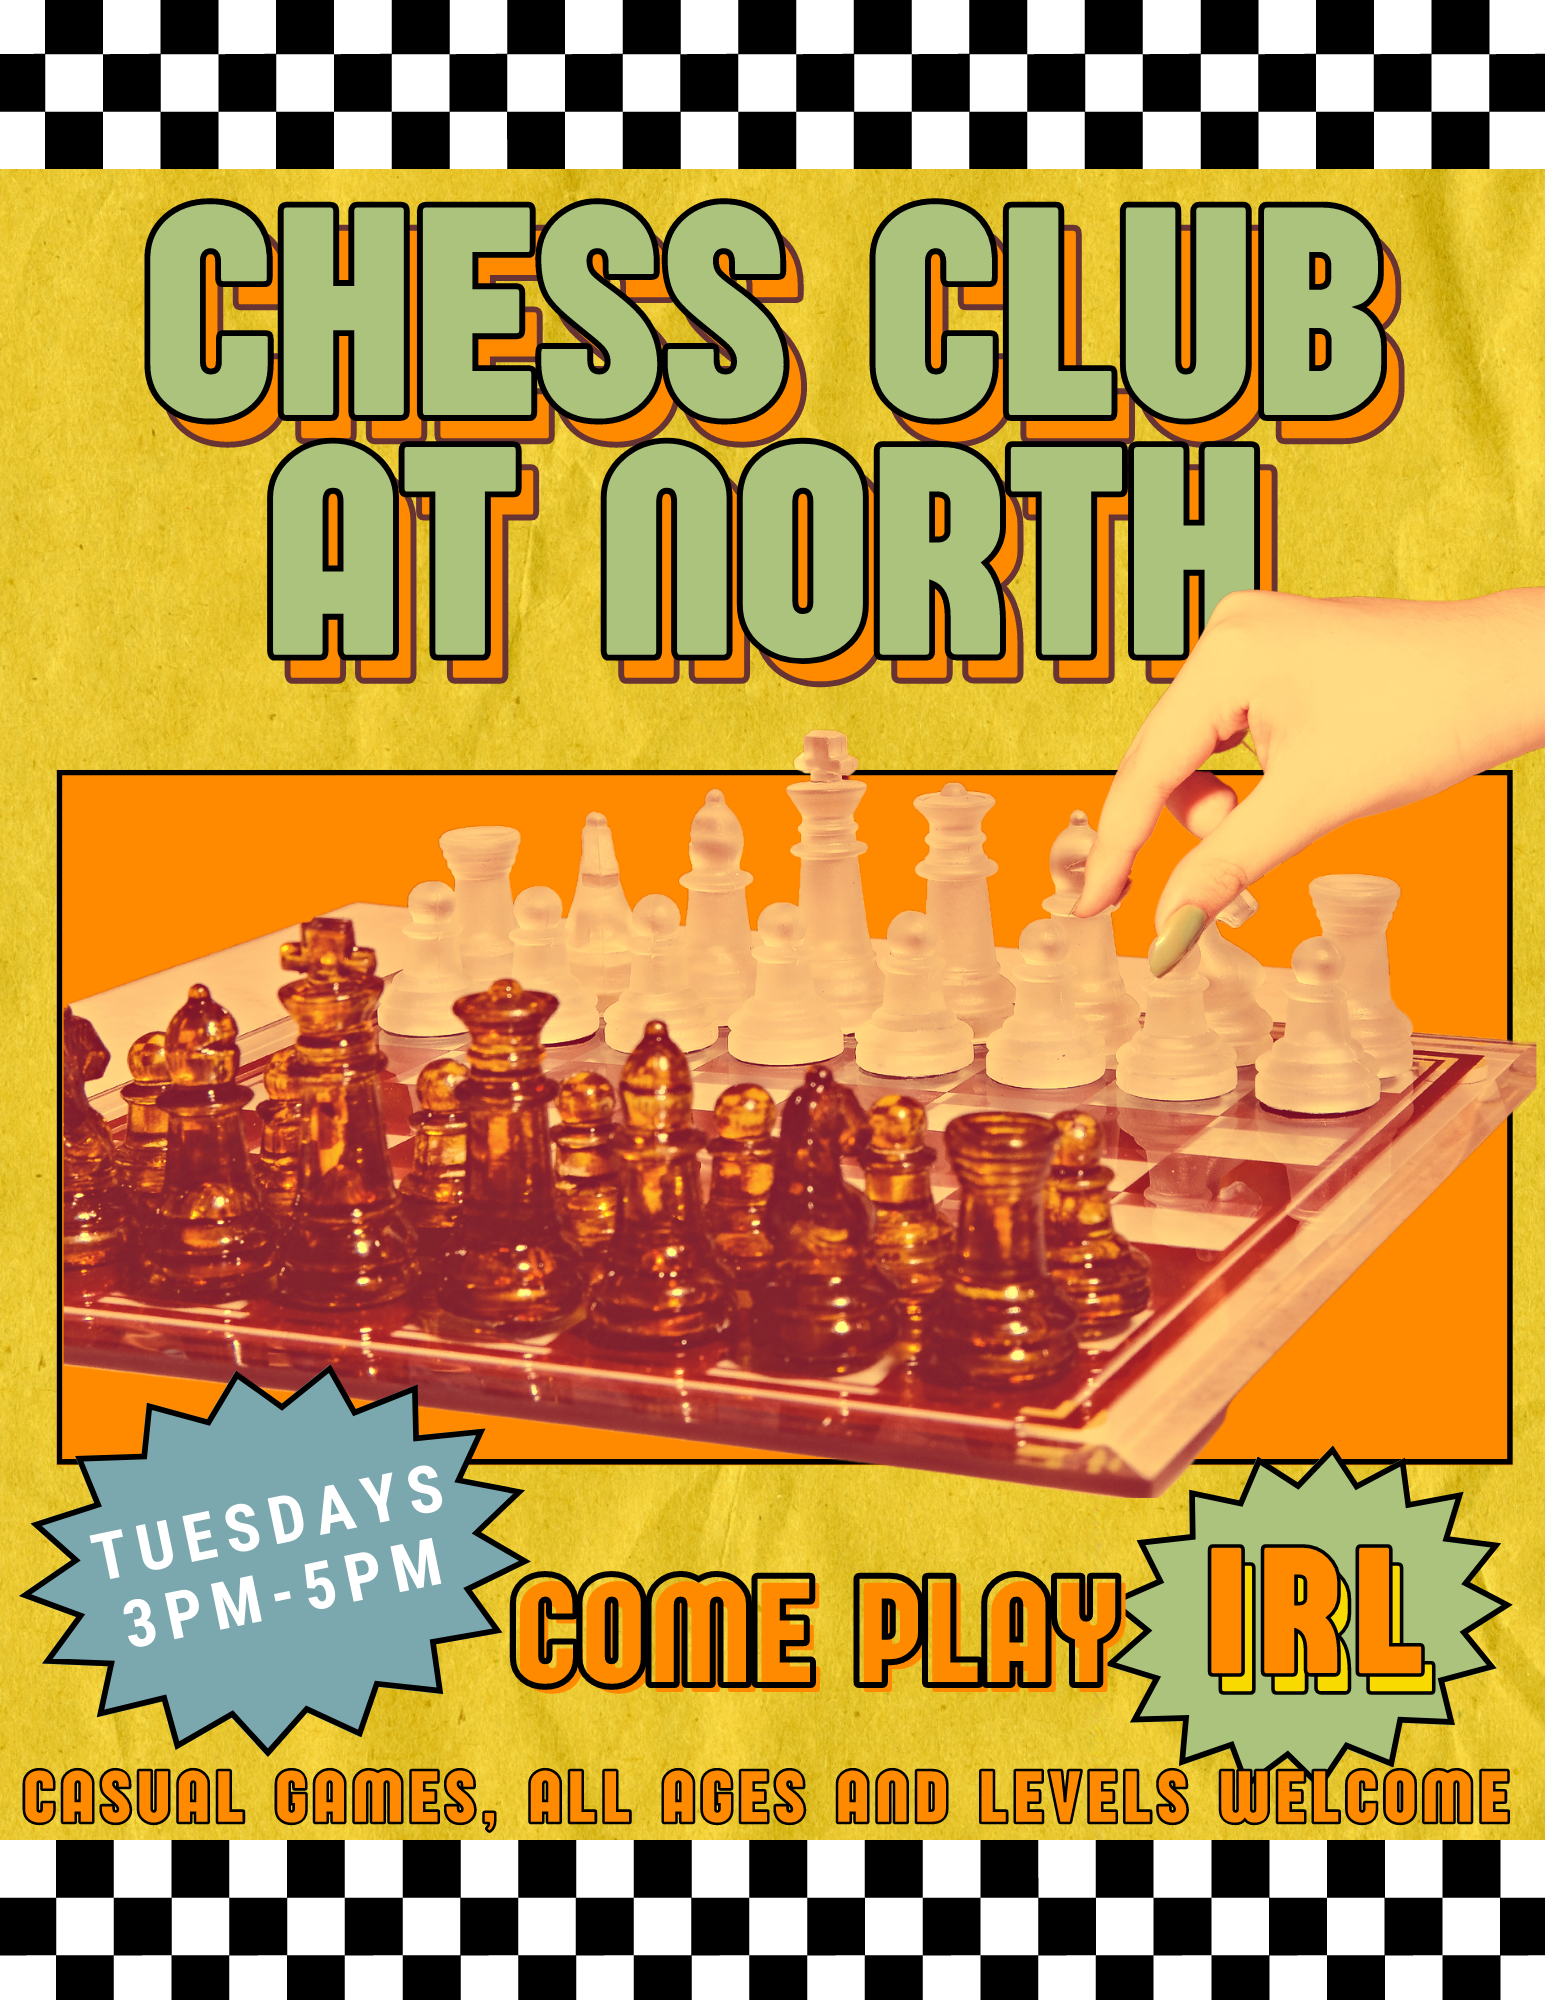 Detective Cookie's Chess Club, Seattle Area Family Fun Calendar